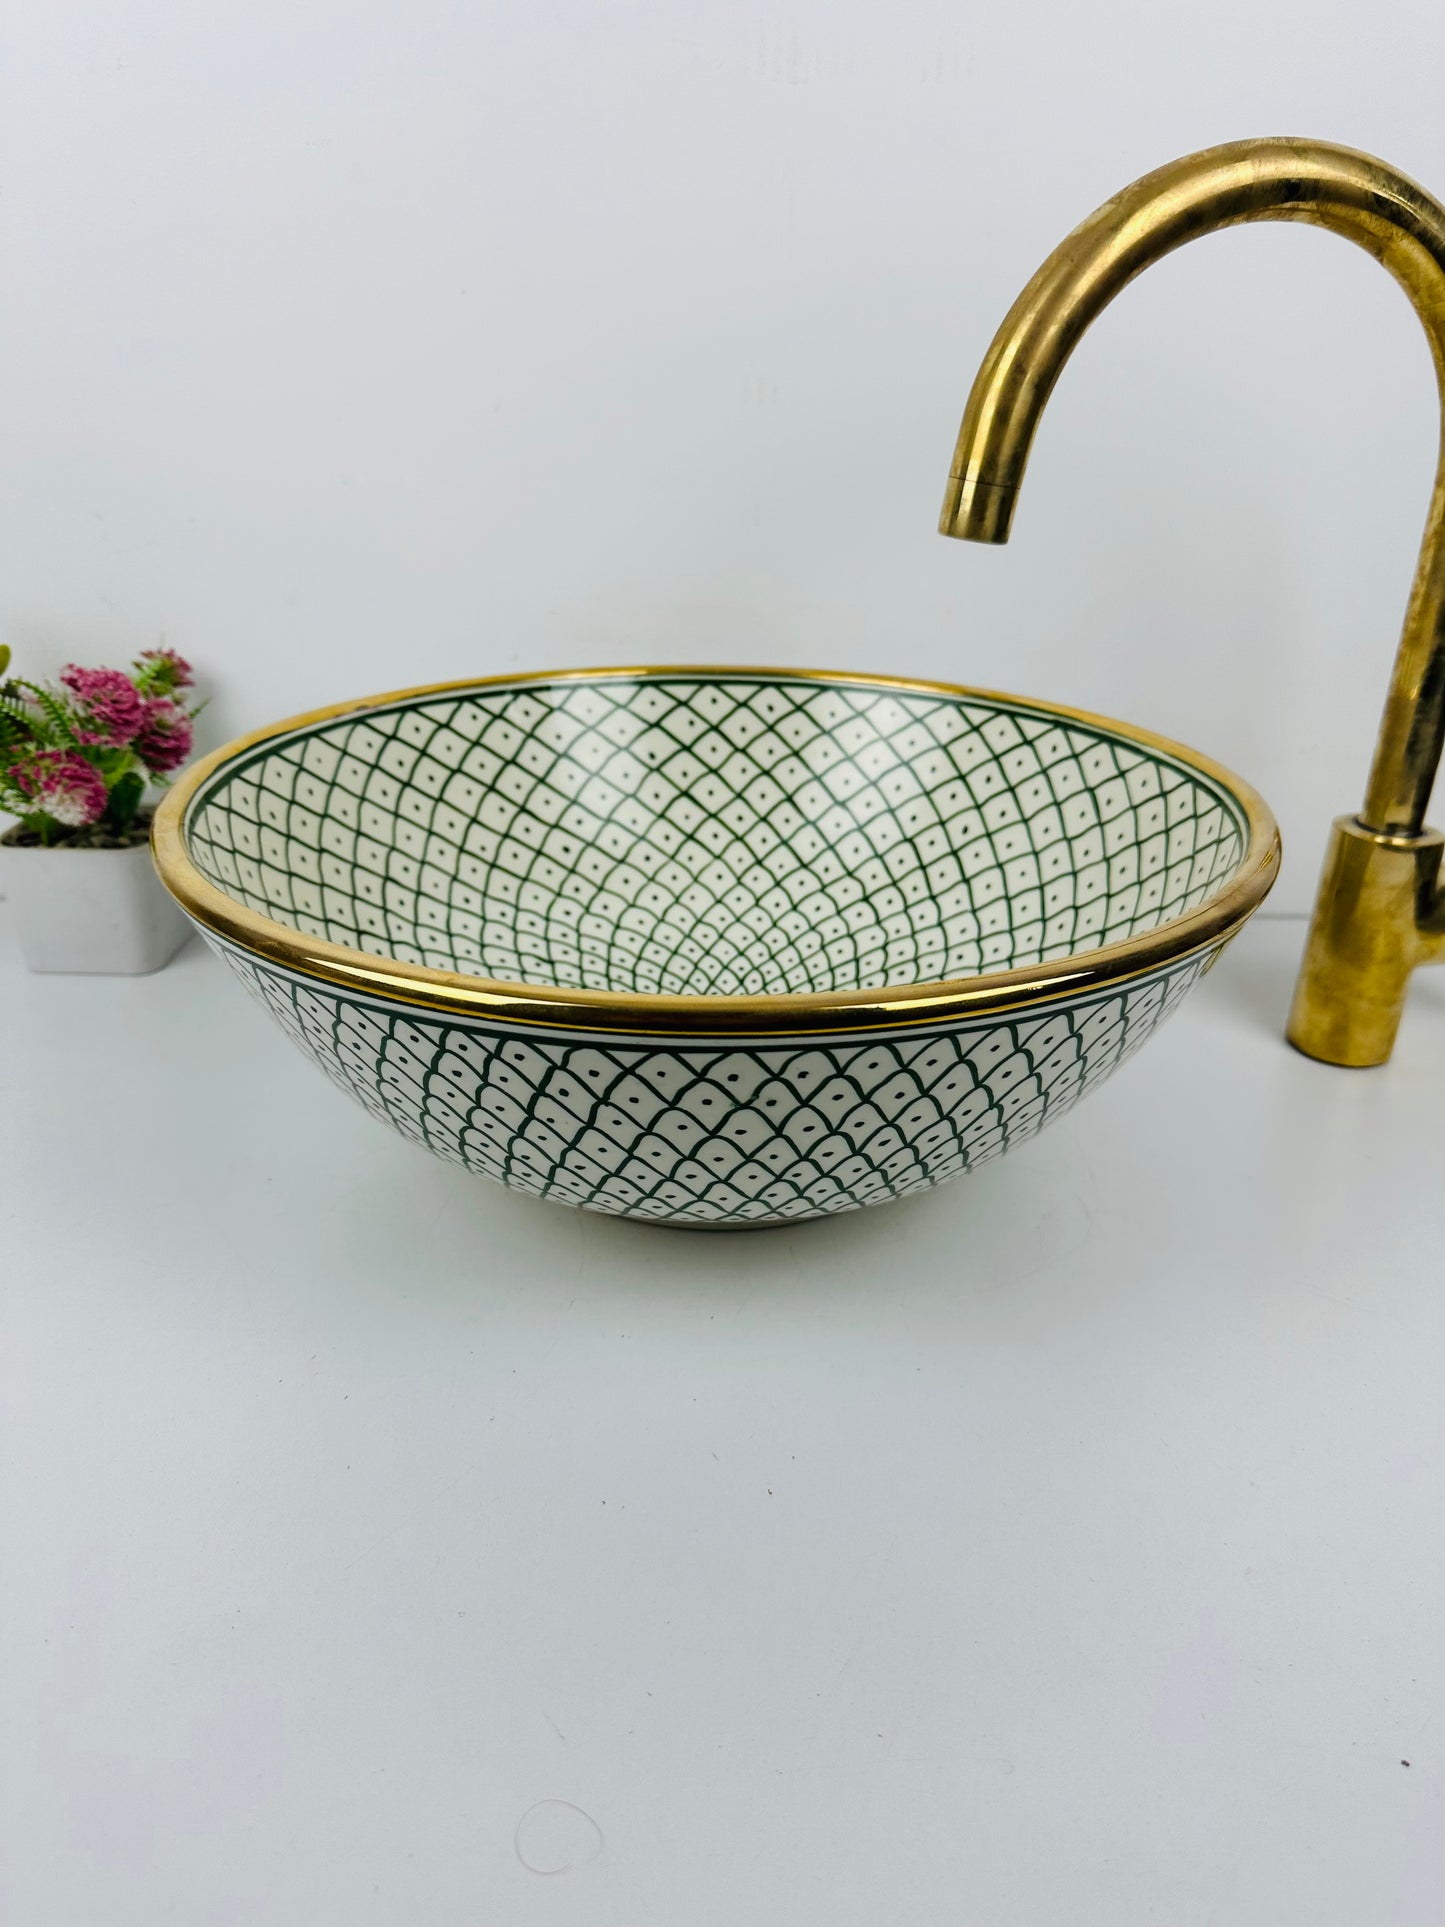 14k gold Emerald Xscape: Handcrafted Ceramic Sink with X-Shaped Designs in Green